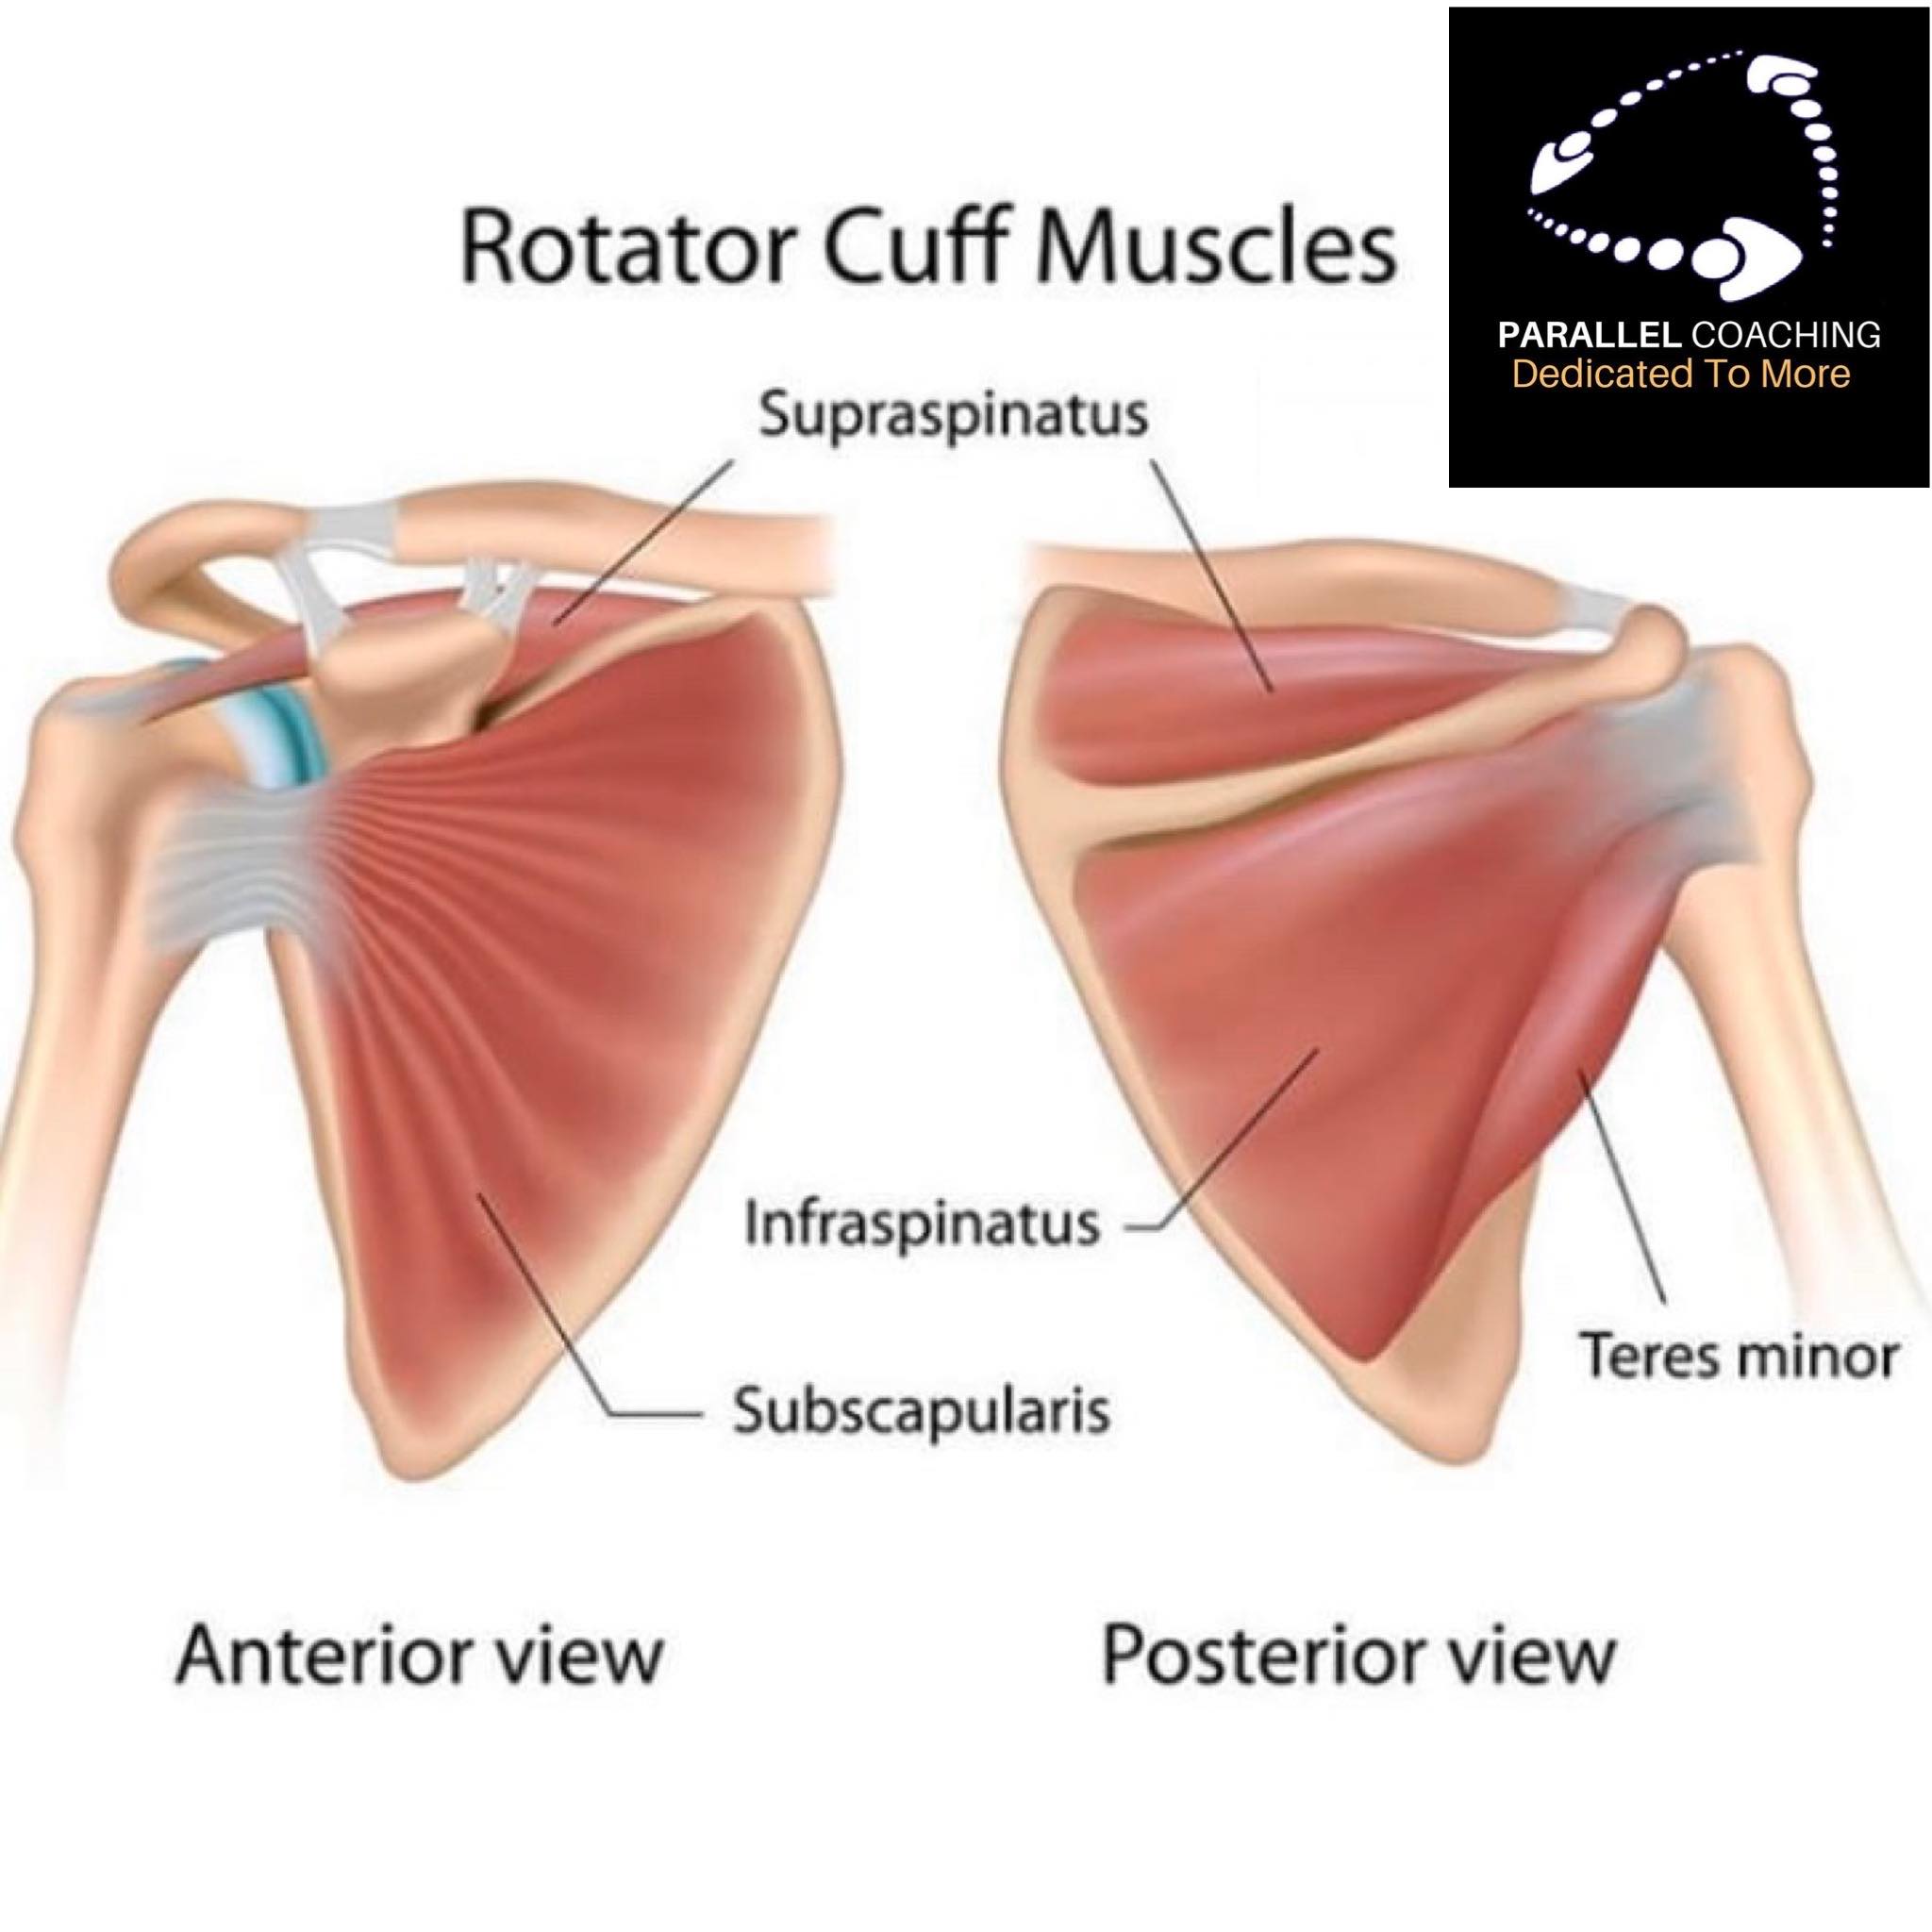 What are the rotator cuff muscles? - Parallel Coaching